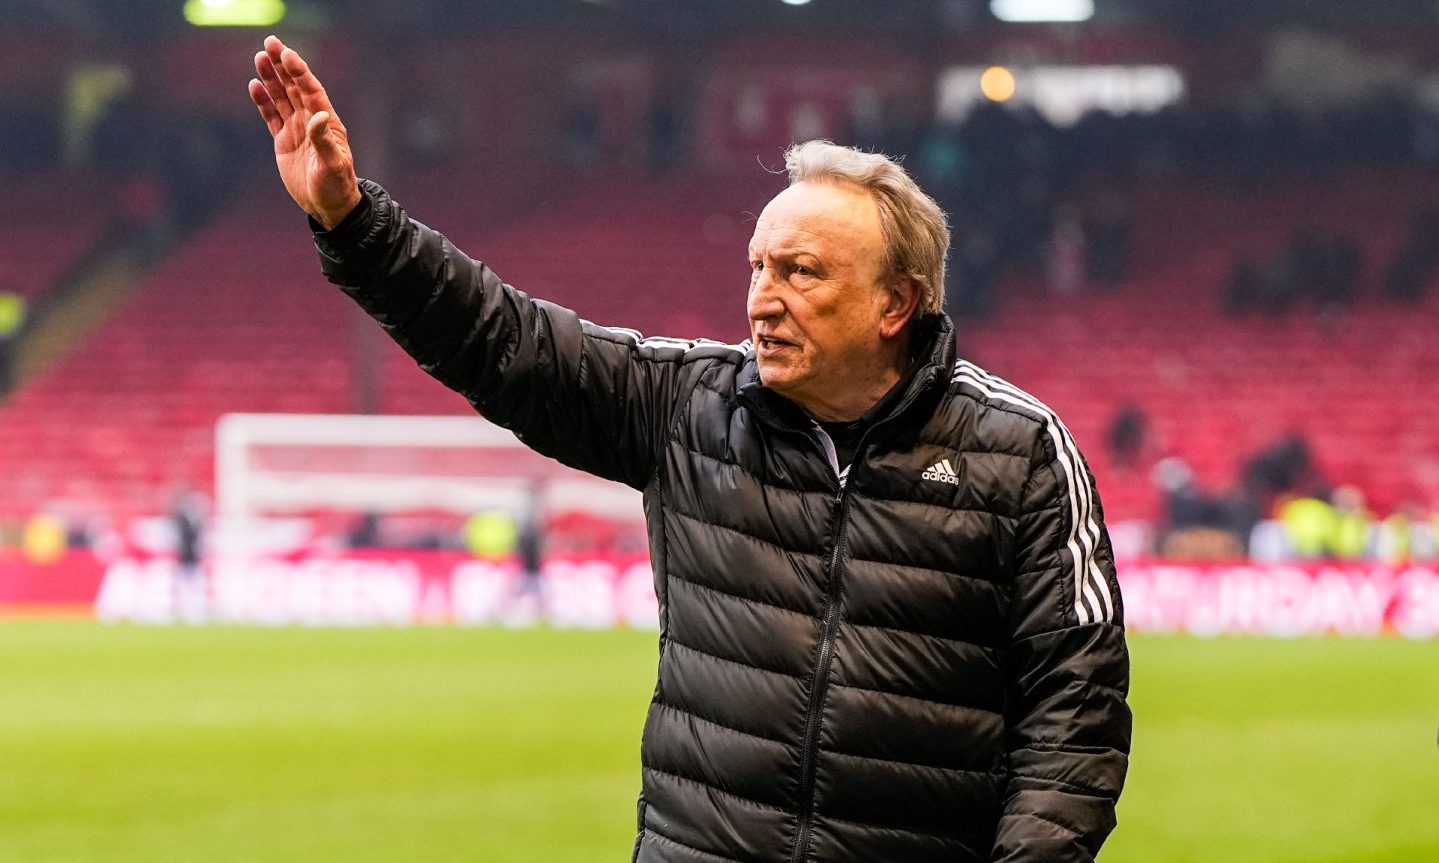 Aberdeen manager Neil Warnock waves to the fans as he walks off the pitch at full-time after beating Kilmarnock. Image: Shutterstock.